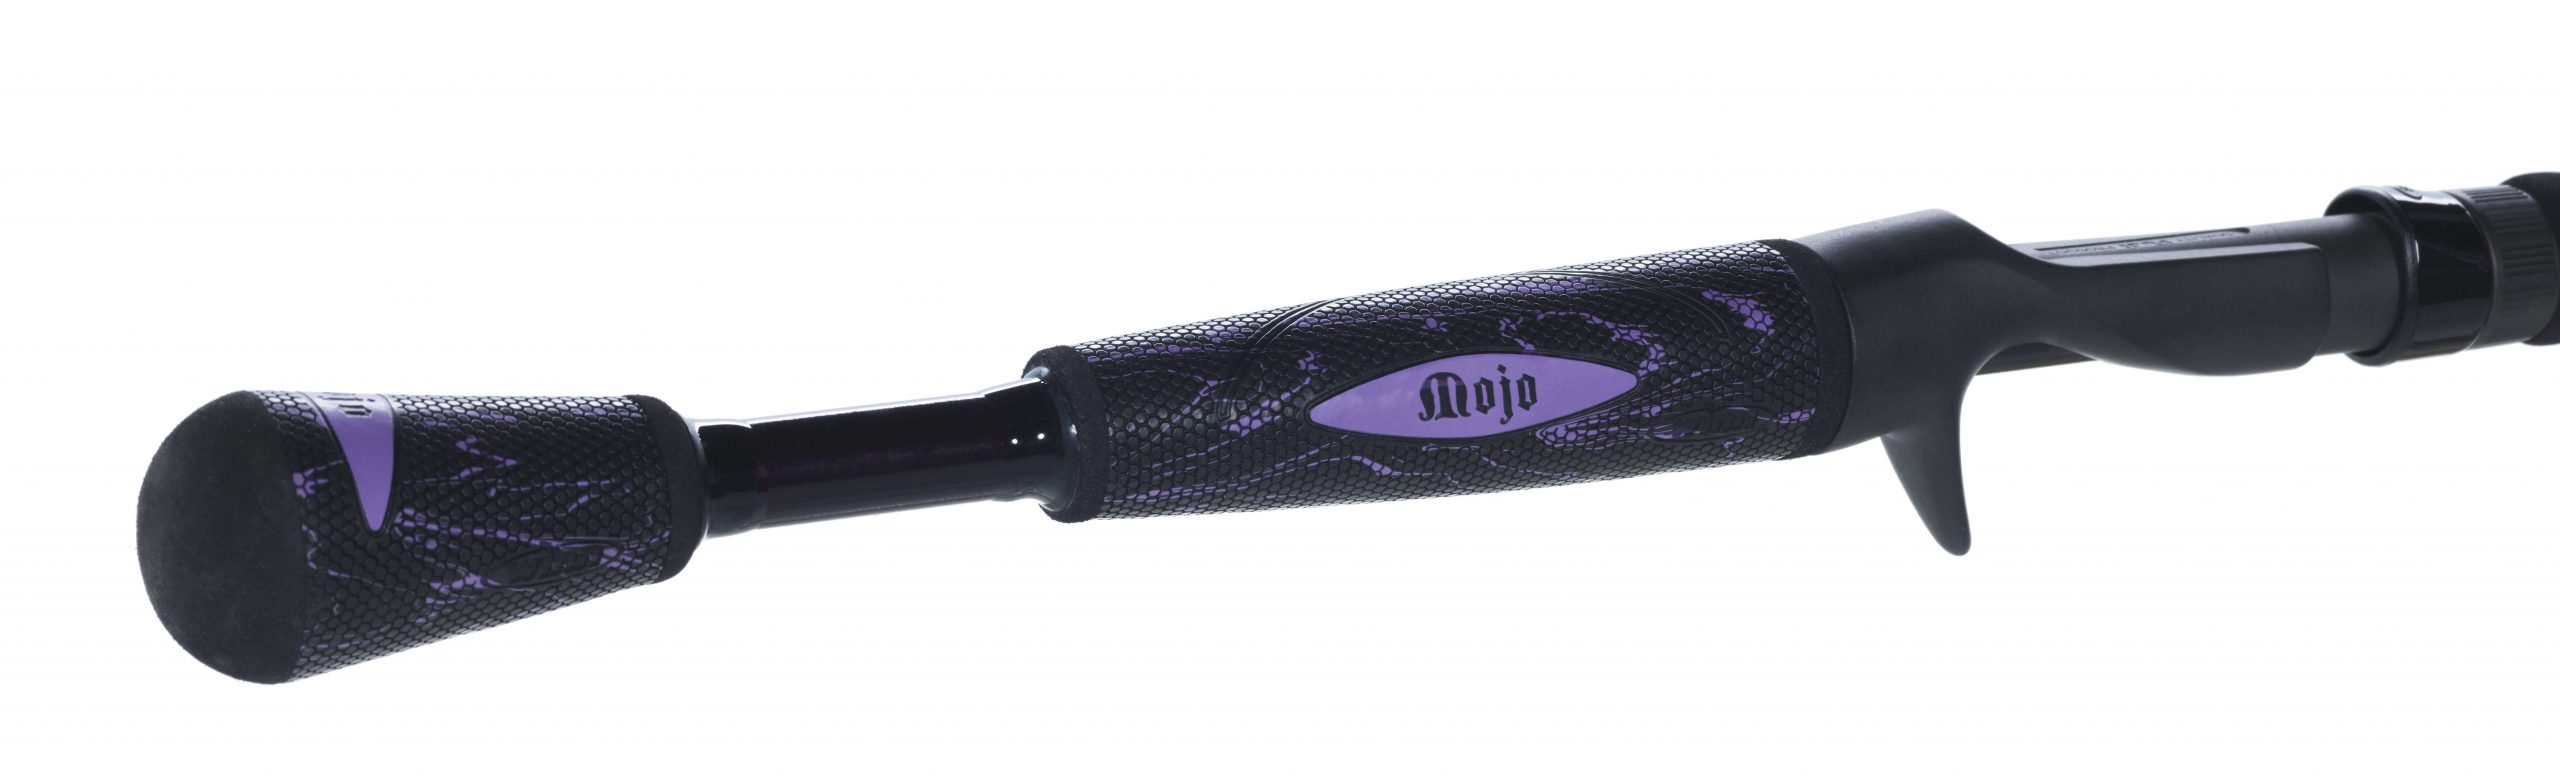 Mojo Yak<BR>
St. Croix<br>
$150<BR>
New for 2019, the Mojo Yak is available in two casting and six spinning models, ranging from 7-foot to 7 feet 6 inches in  medium-light, medium and medium-heavy powers, these fast-action rods deliver the backbone to hoist fish up from water level and the sensitivity to understand exactly where your lure lies underwater.
